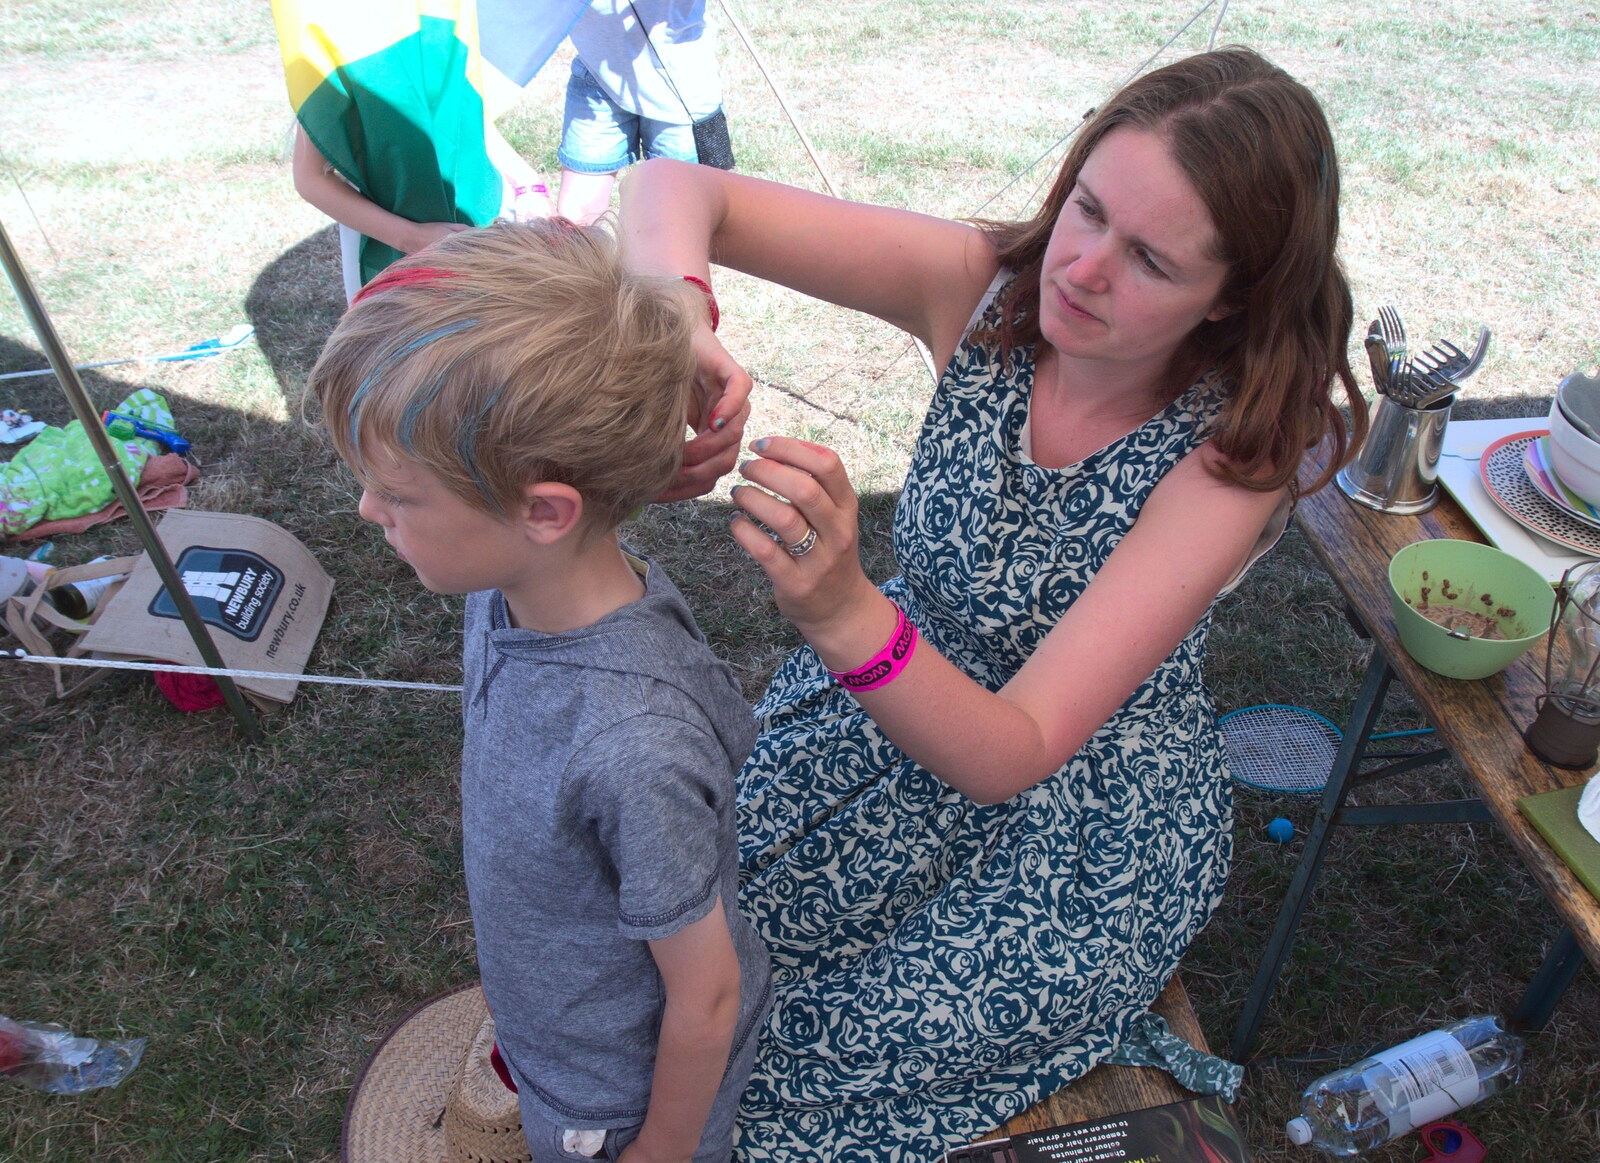 Harry gets his hair done from WoW Festival, Burston, Norfolk - 29th June - 1st July 2018